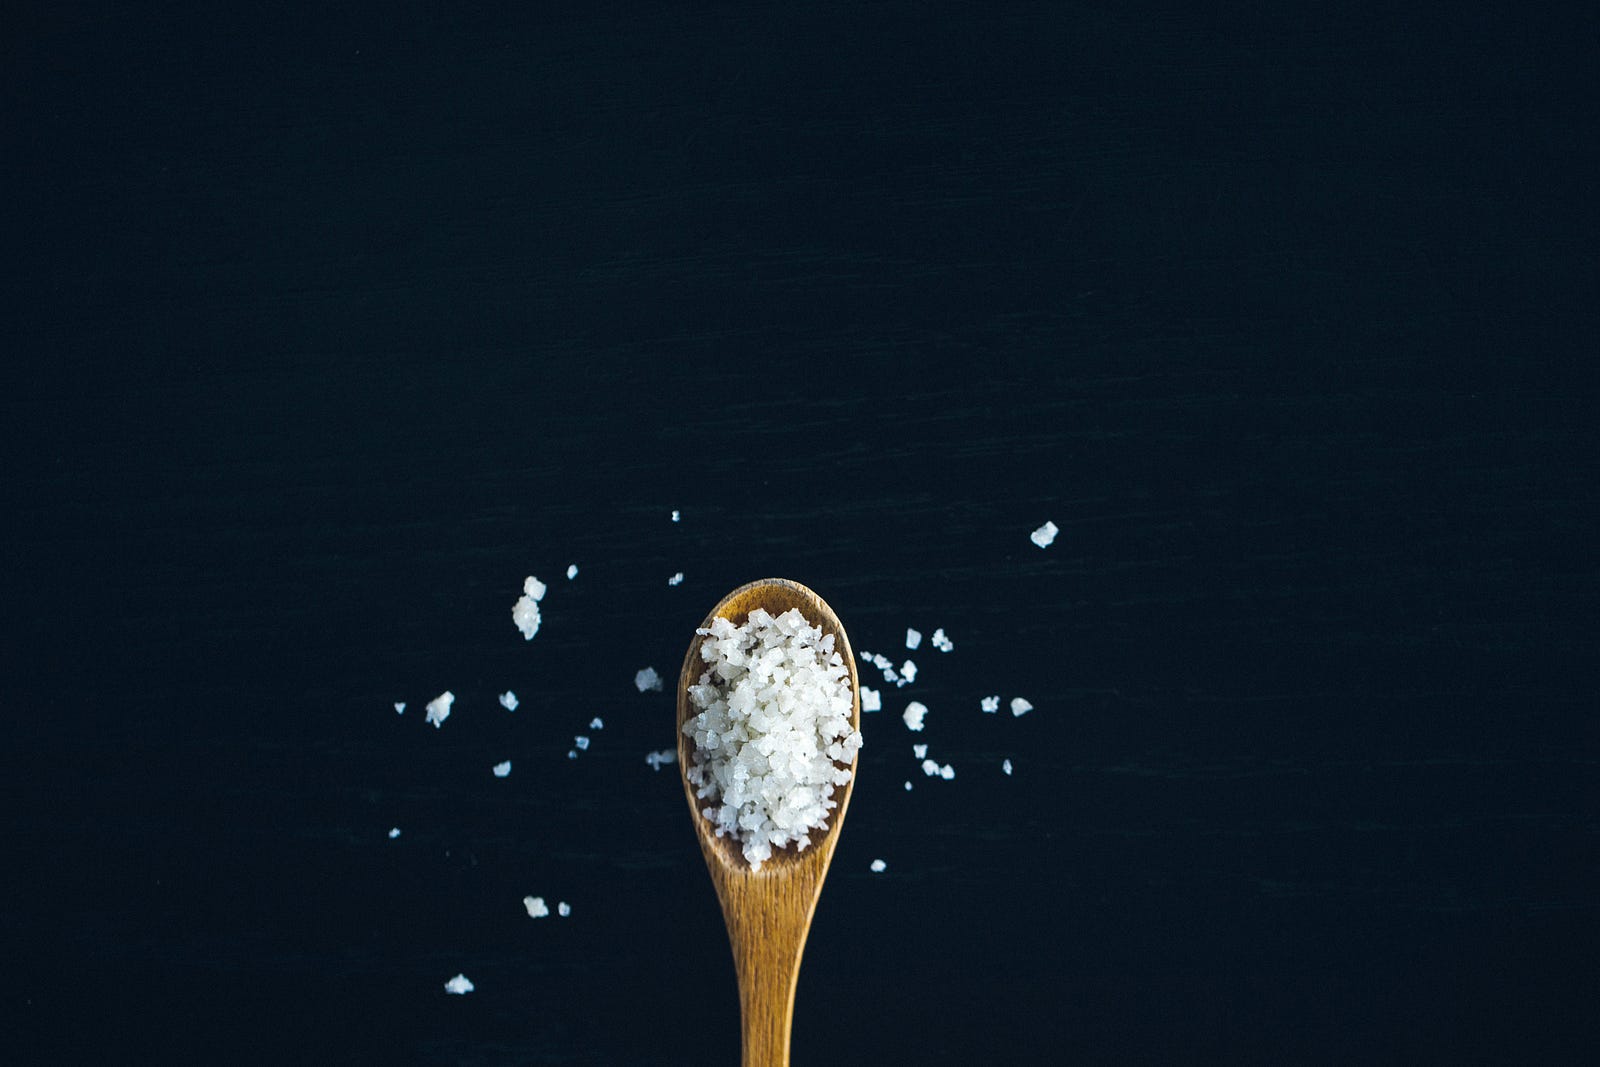 A small wooden spoon emerges from the bottom of the image, holding coarse salt.